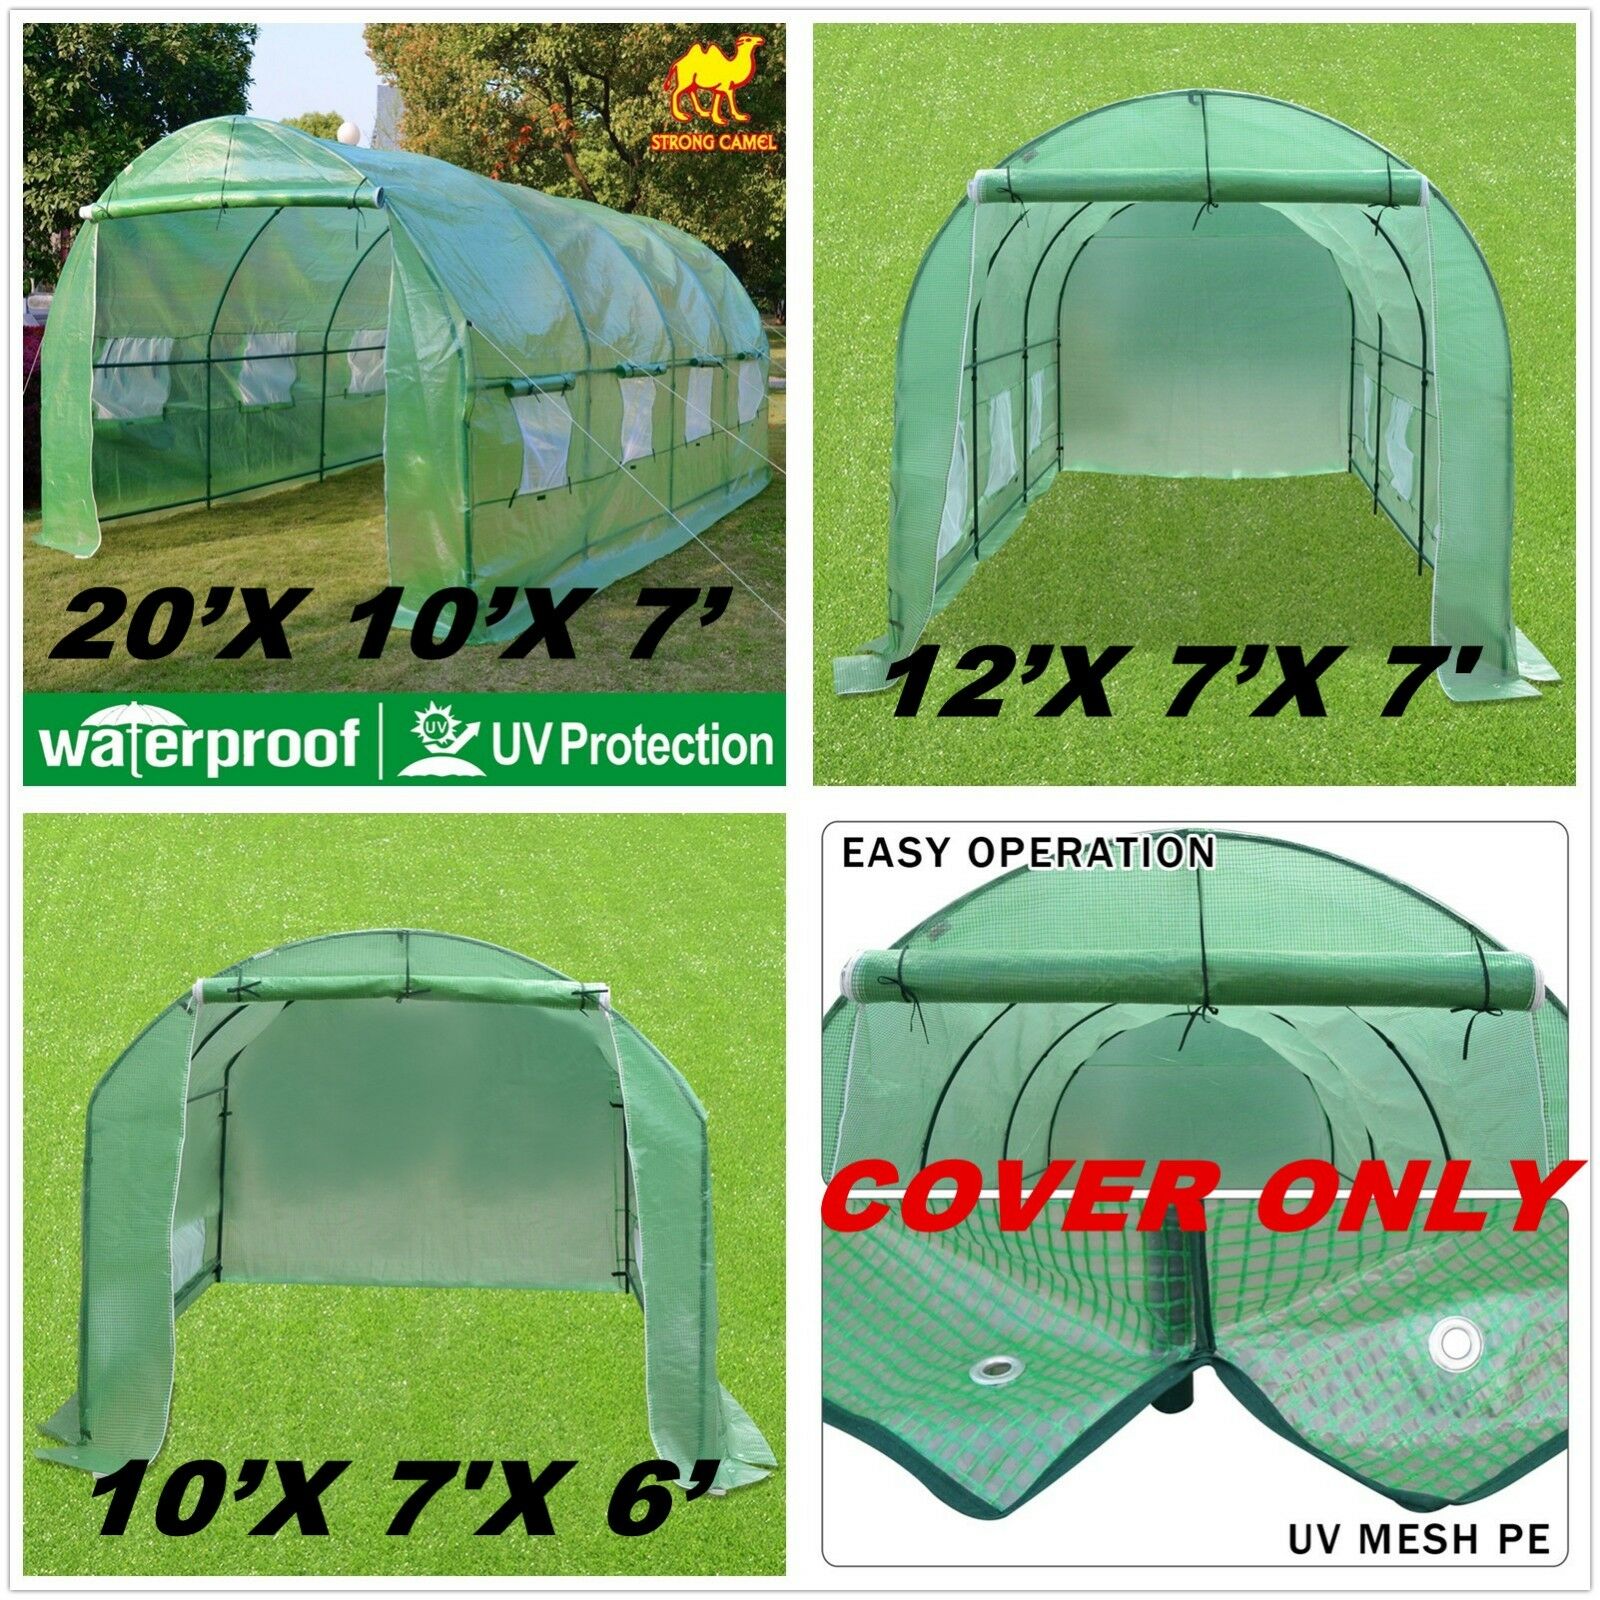 20'x10'x7', 12'x7'x7', 10'x7'x6' Strong Camel Green House Replacement Cover Only